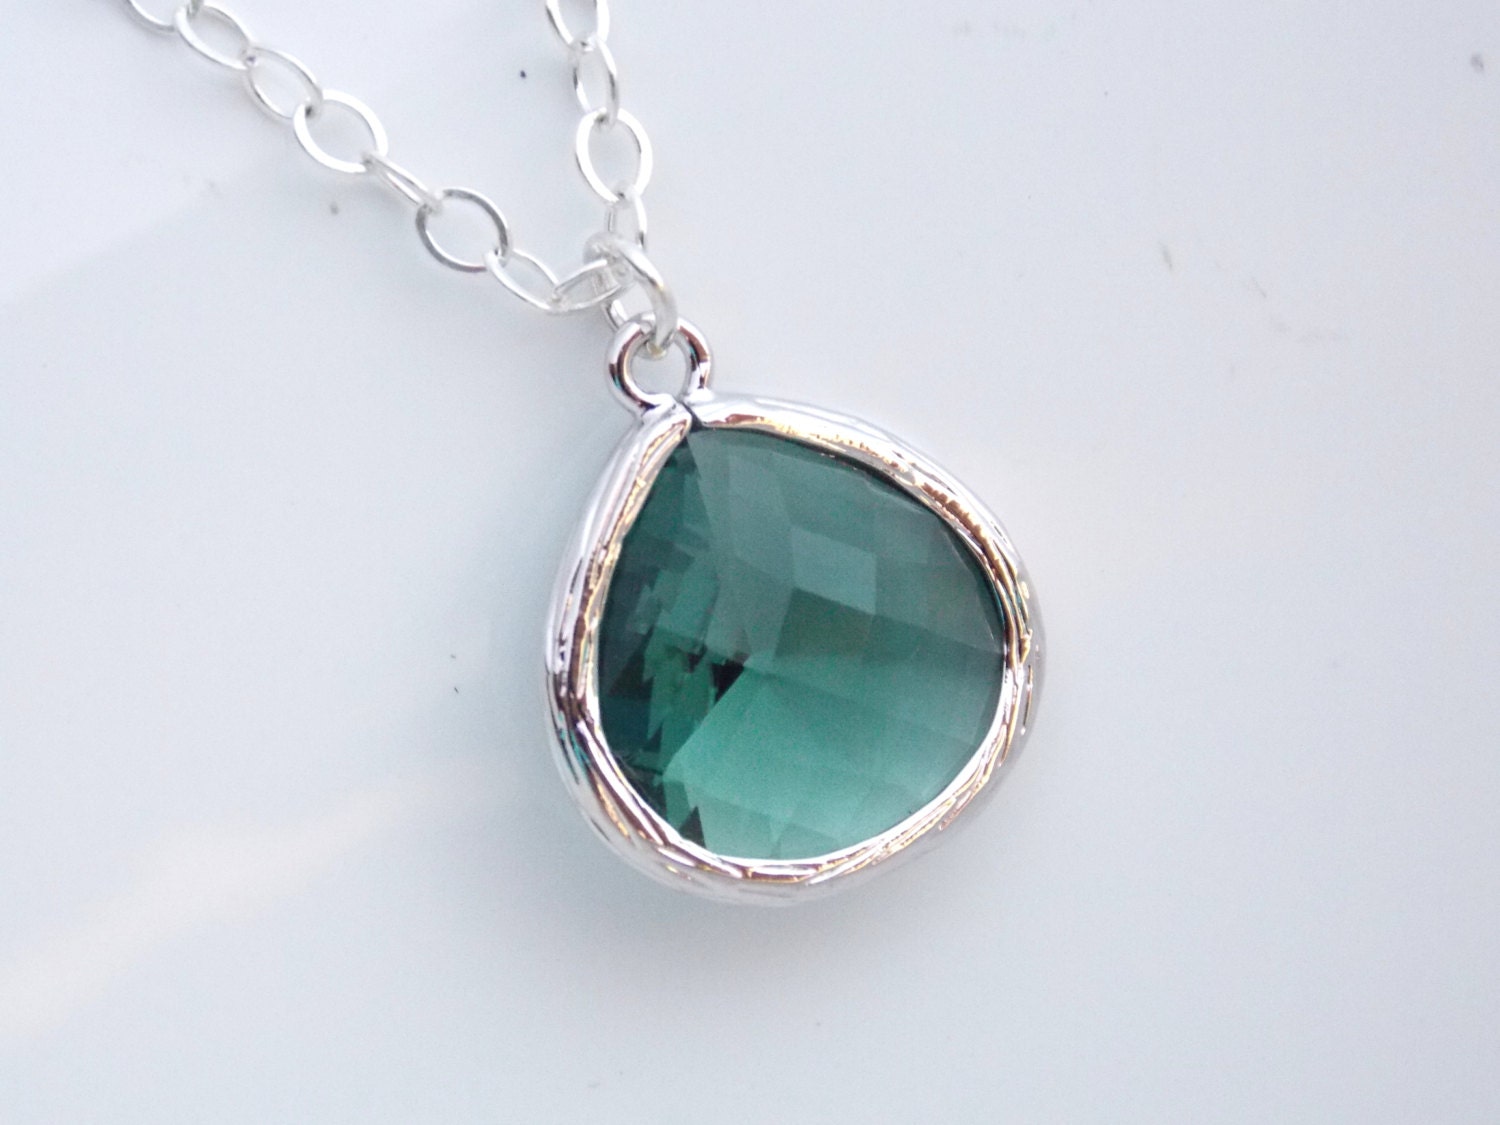 Teal Necklace Silver Teal Pendant Sterling Silver Aqua - Etsy